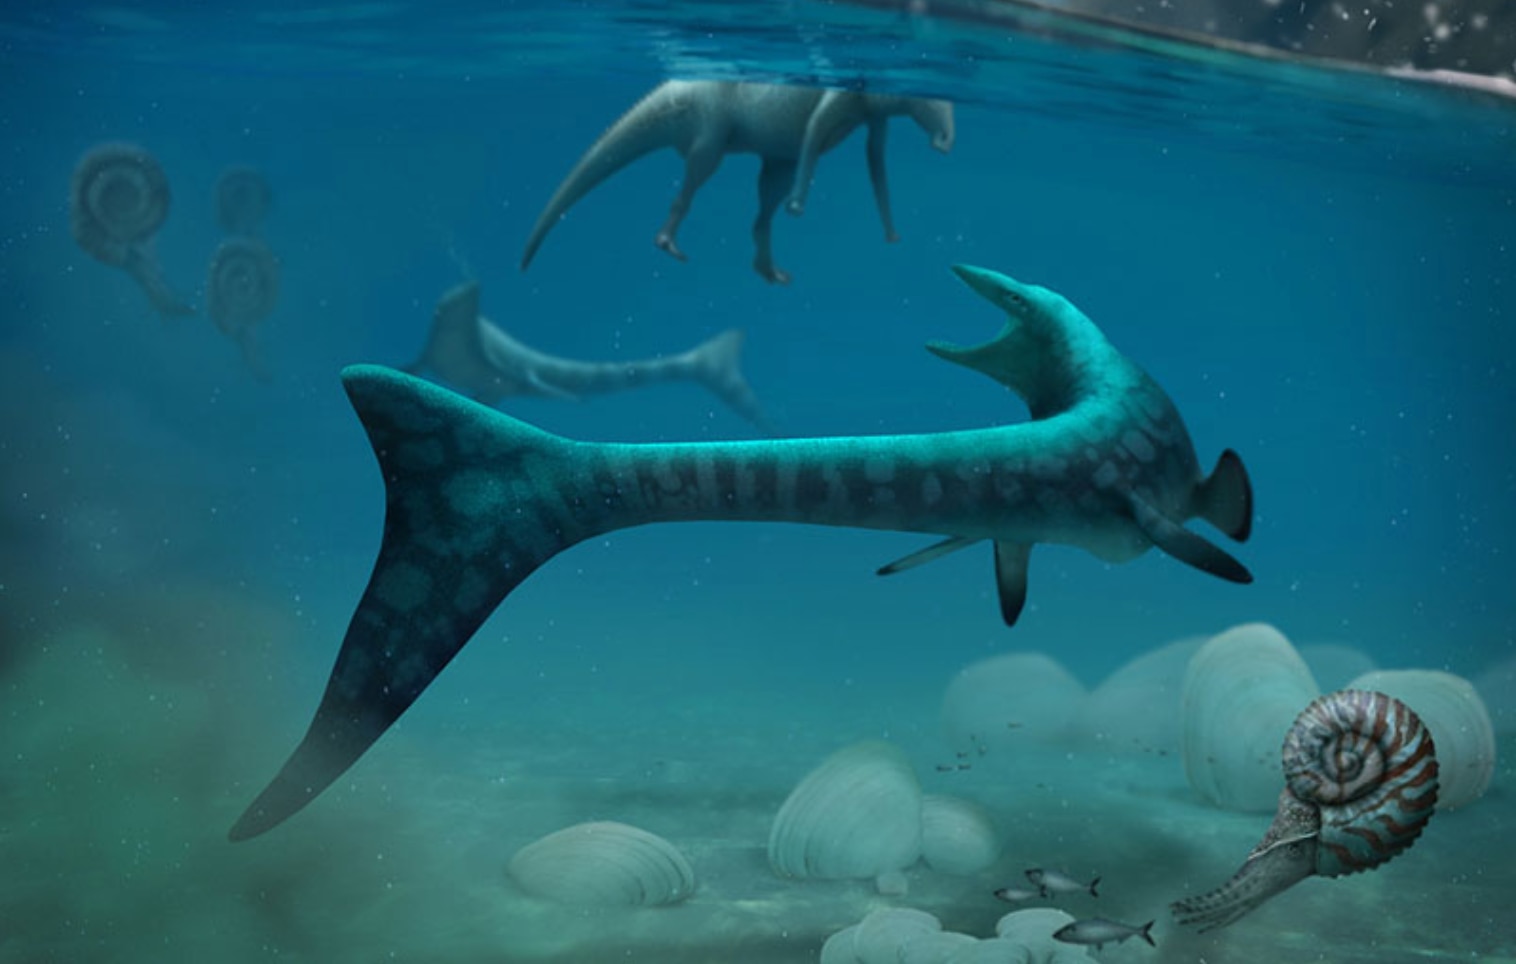 Miners in Alberta uncover a tylosaurus fossil while seeking gemstones |  SYFY WIRE